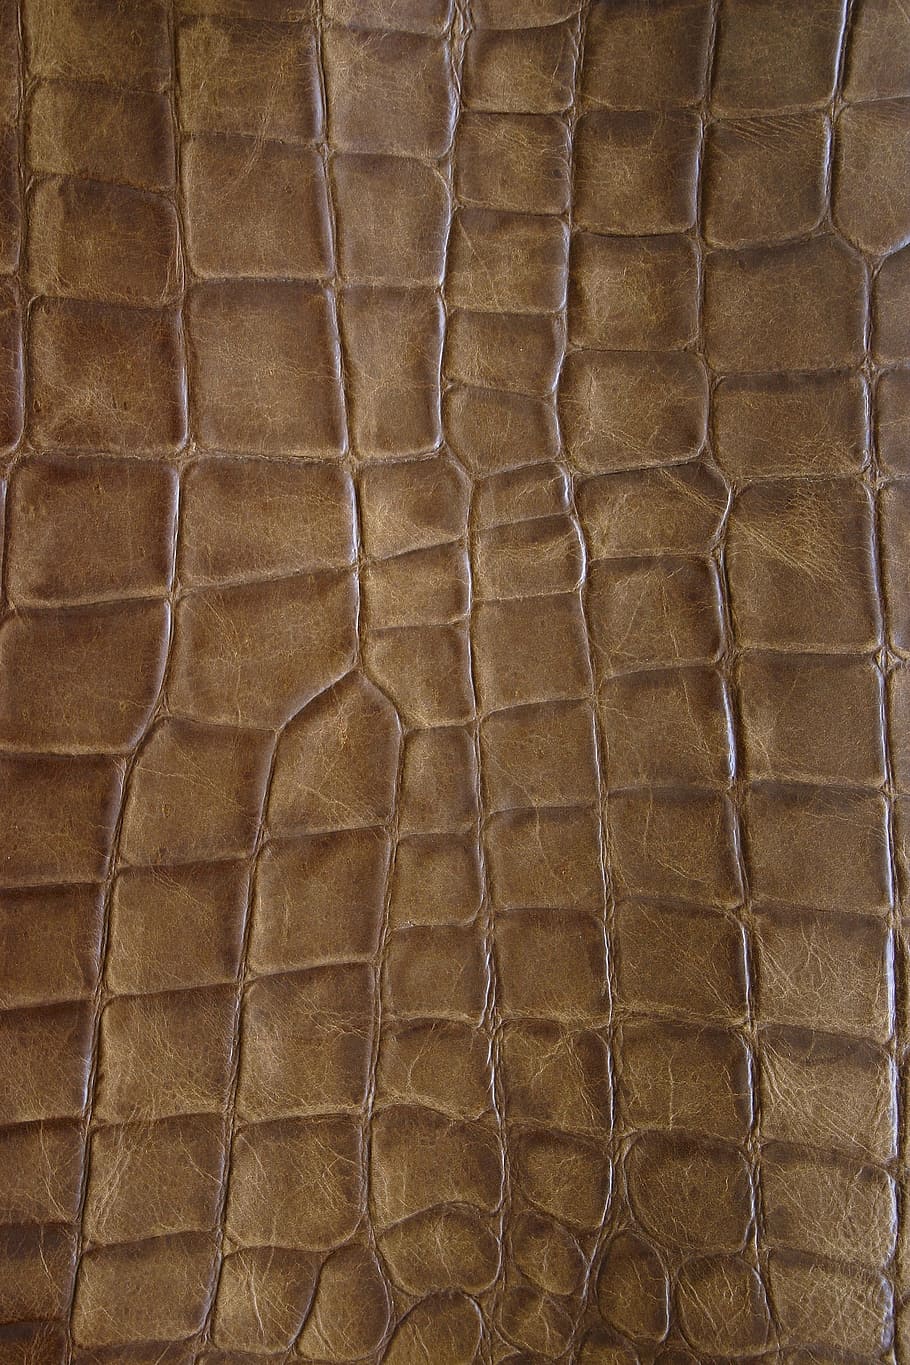 Brown, Leather, Structure, Detail, brown leather, textured, backgrounds, animal skin, material, textured effect